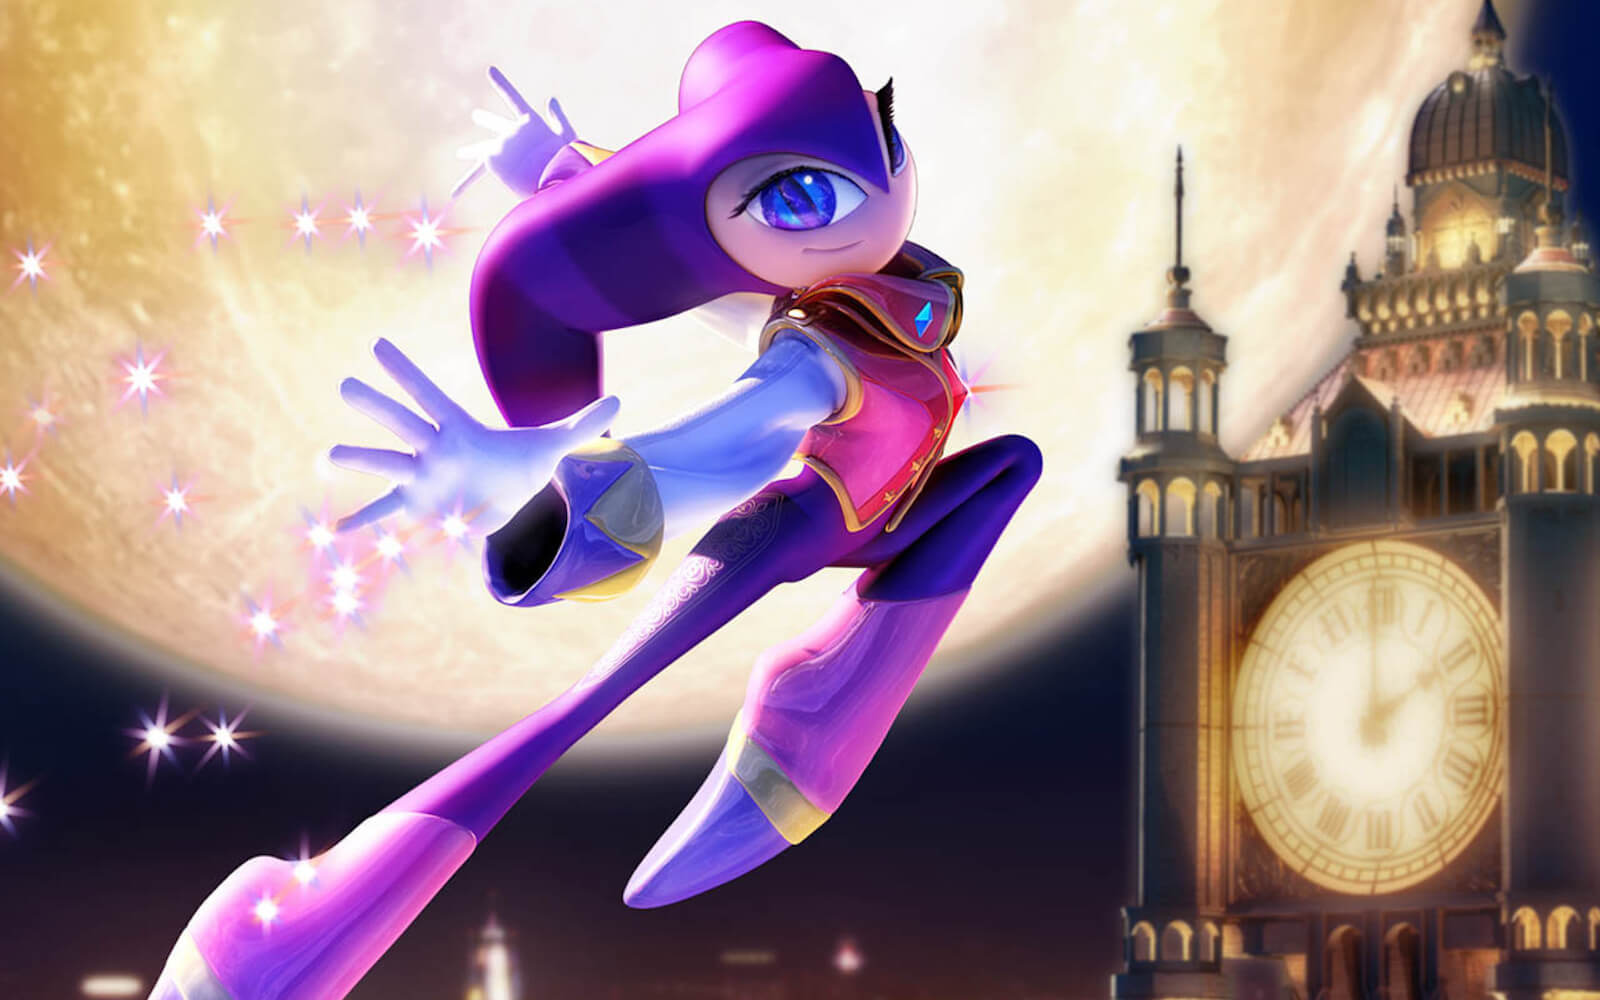 NiGHTS into dreams - The Cane and Rinse videogame podcast